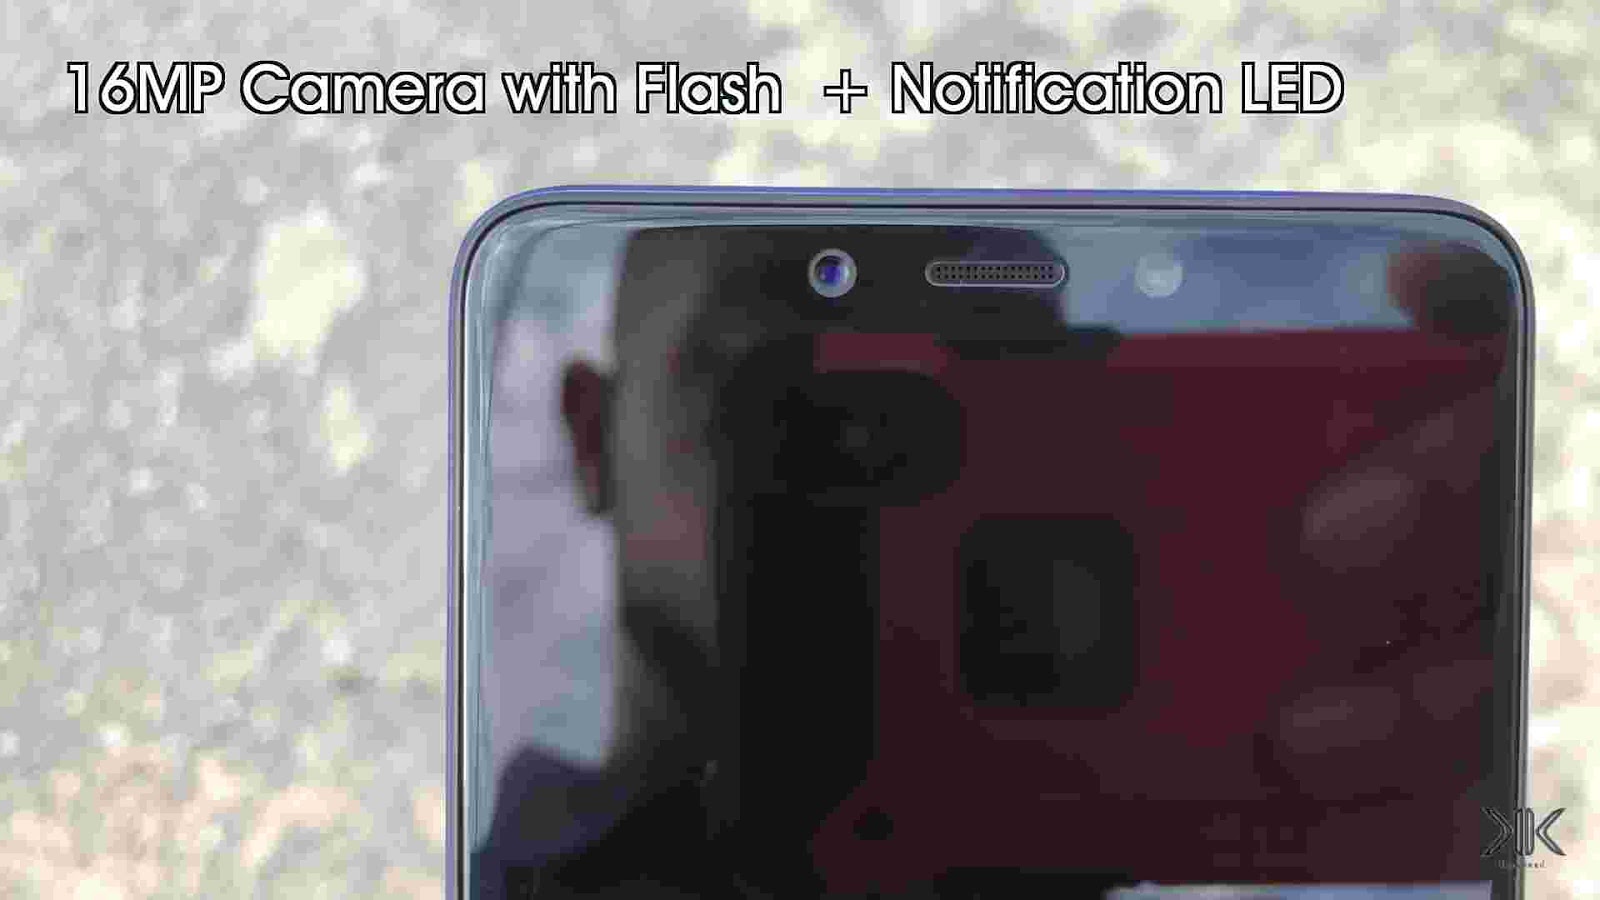 16MP front facing camera with Notifications LED Light.